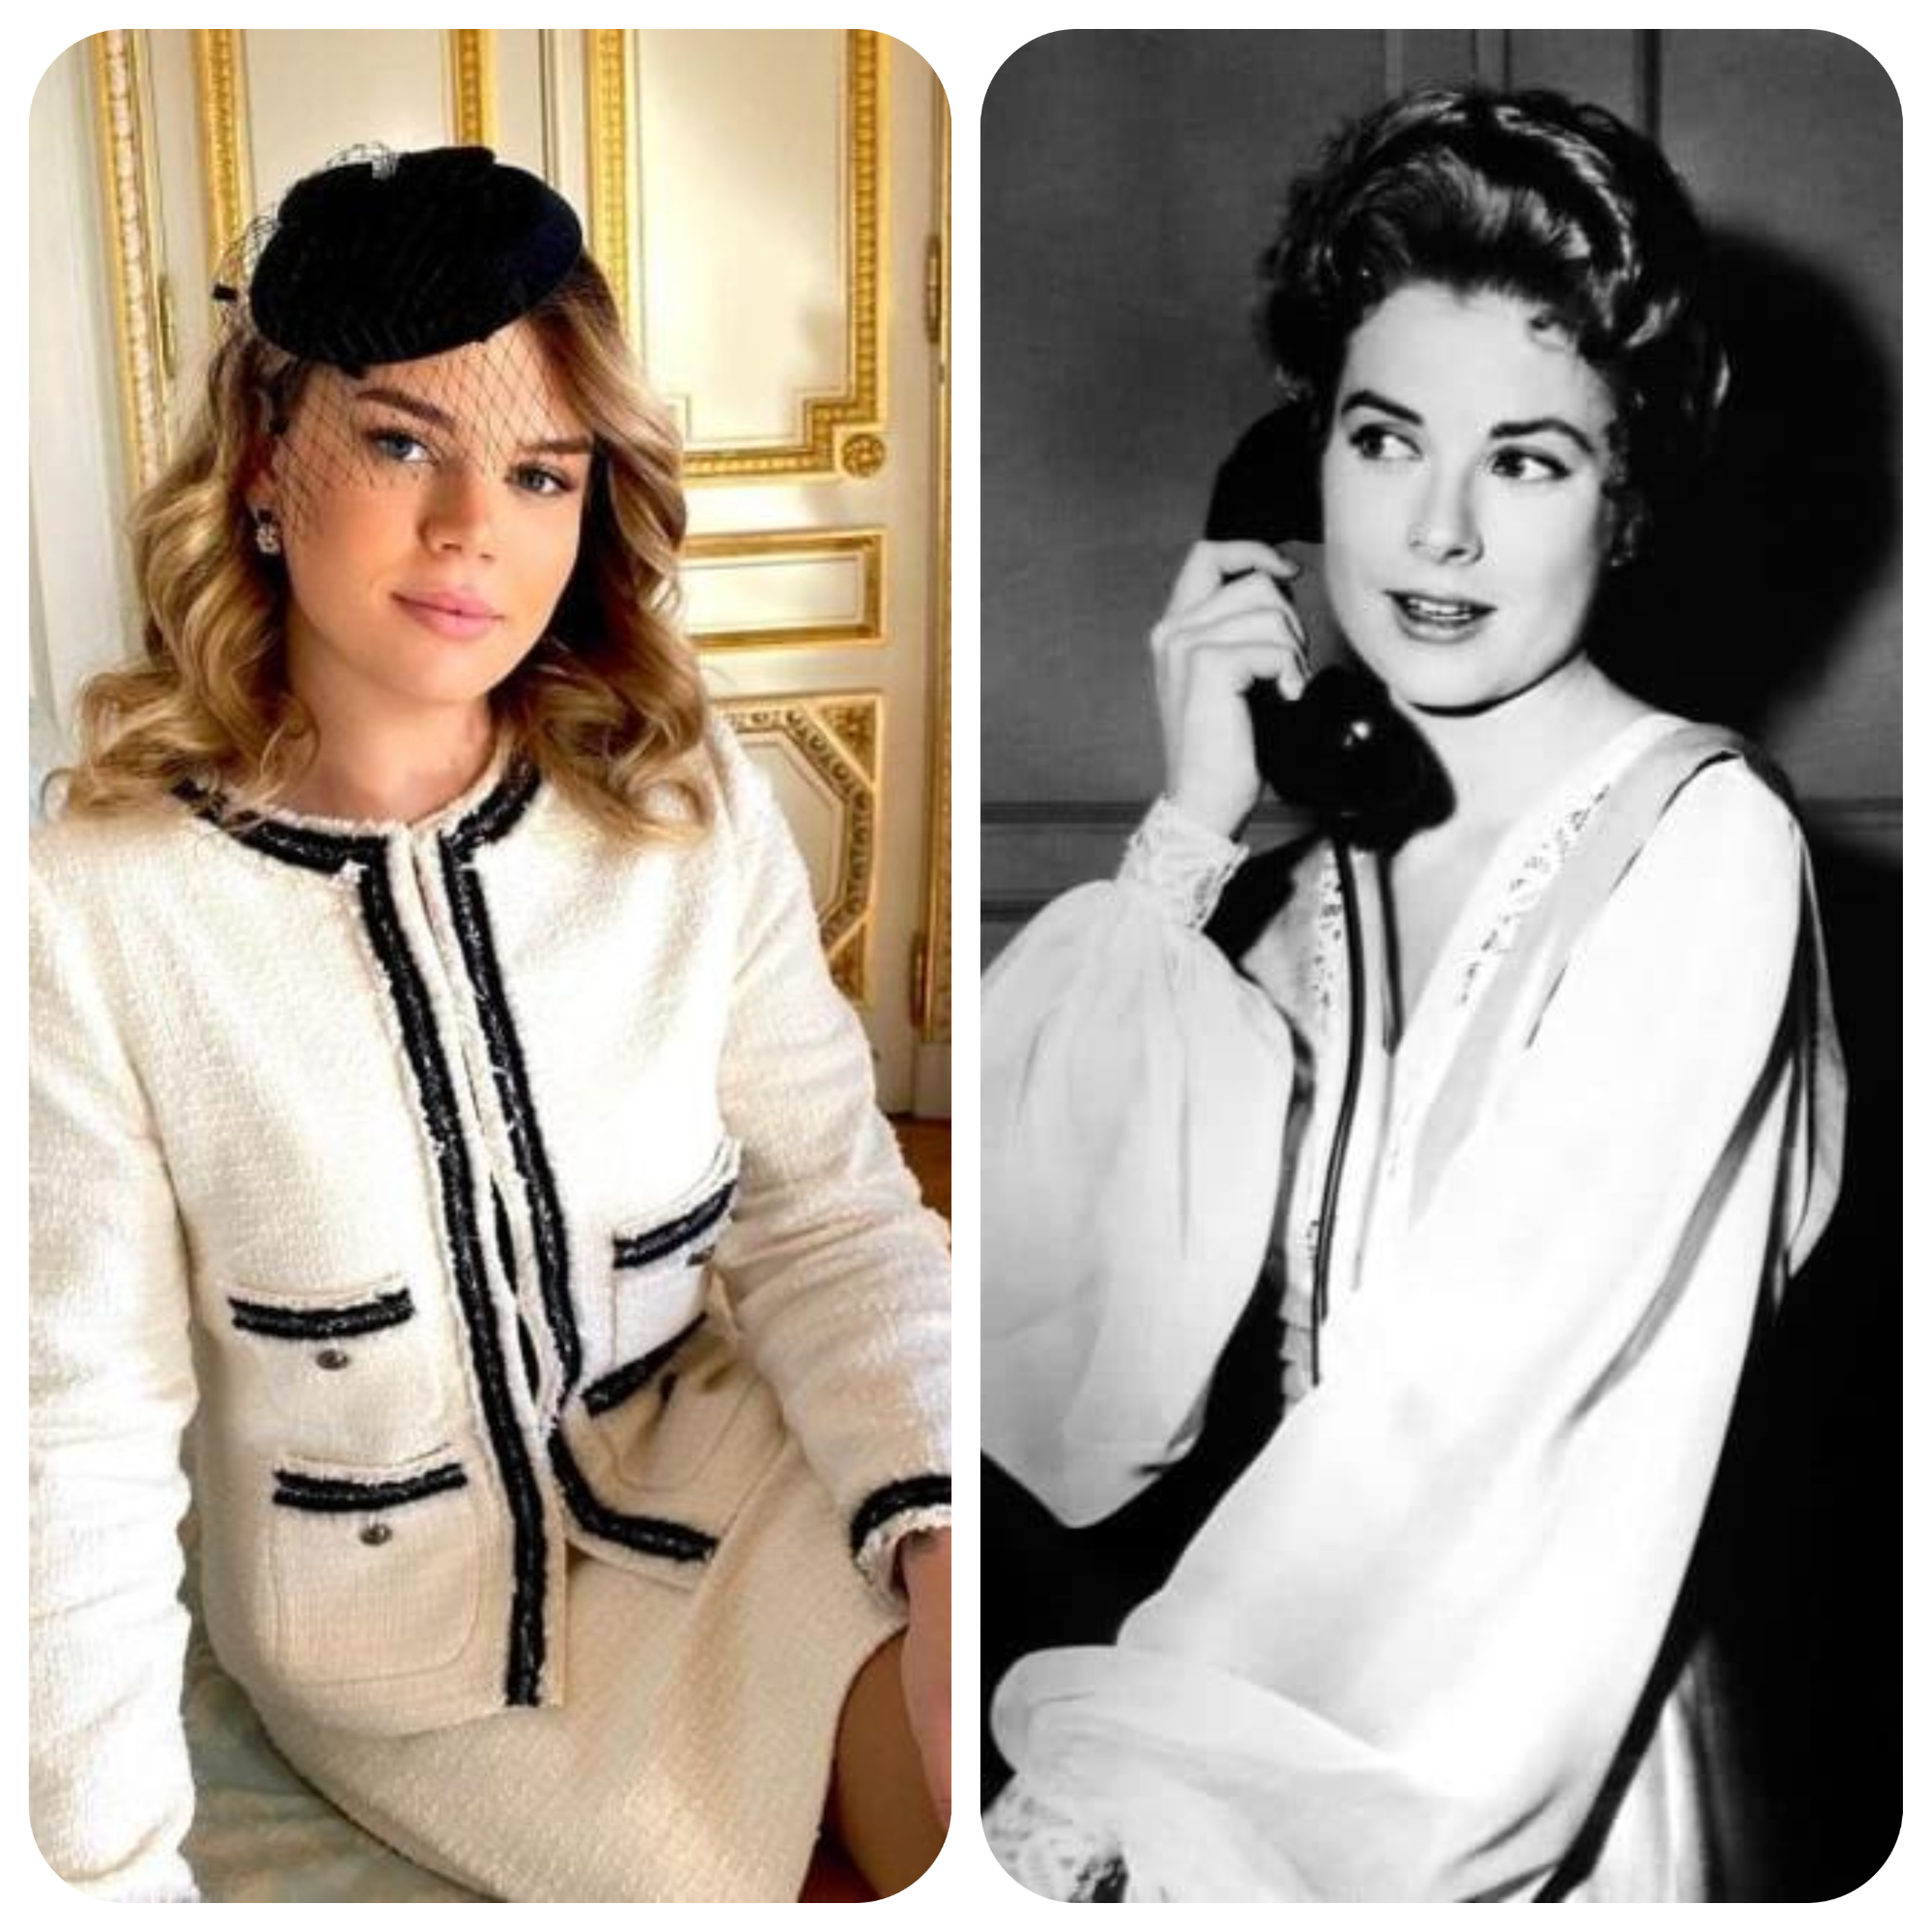  Grace Kelly's Lookalike Granddaughter: Camille Gottlieb Stuns with Beauty and Compassion